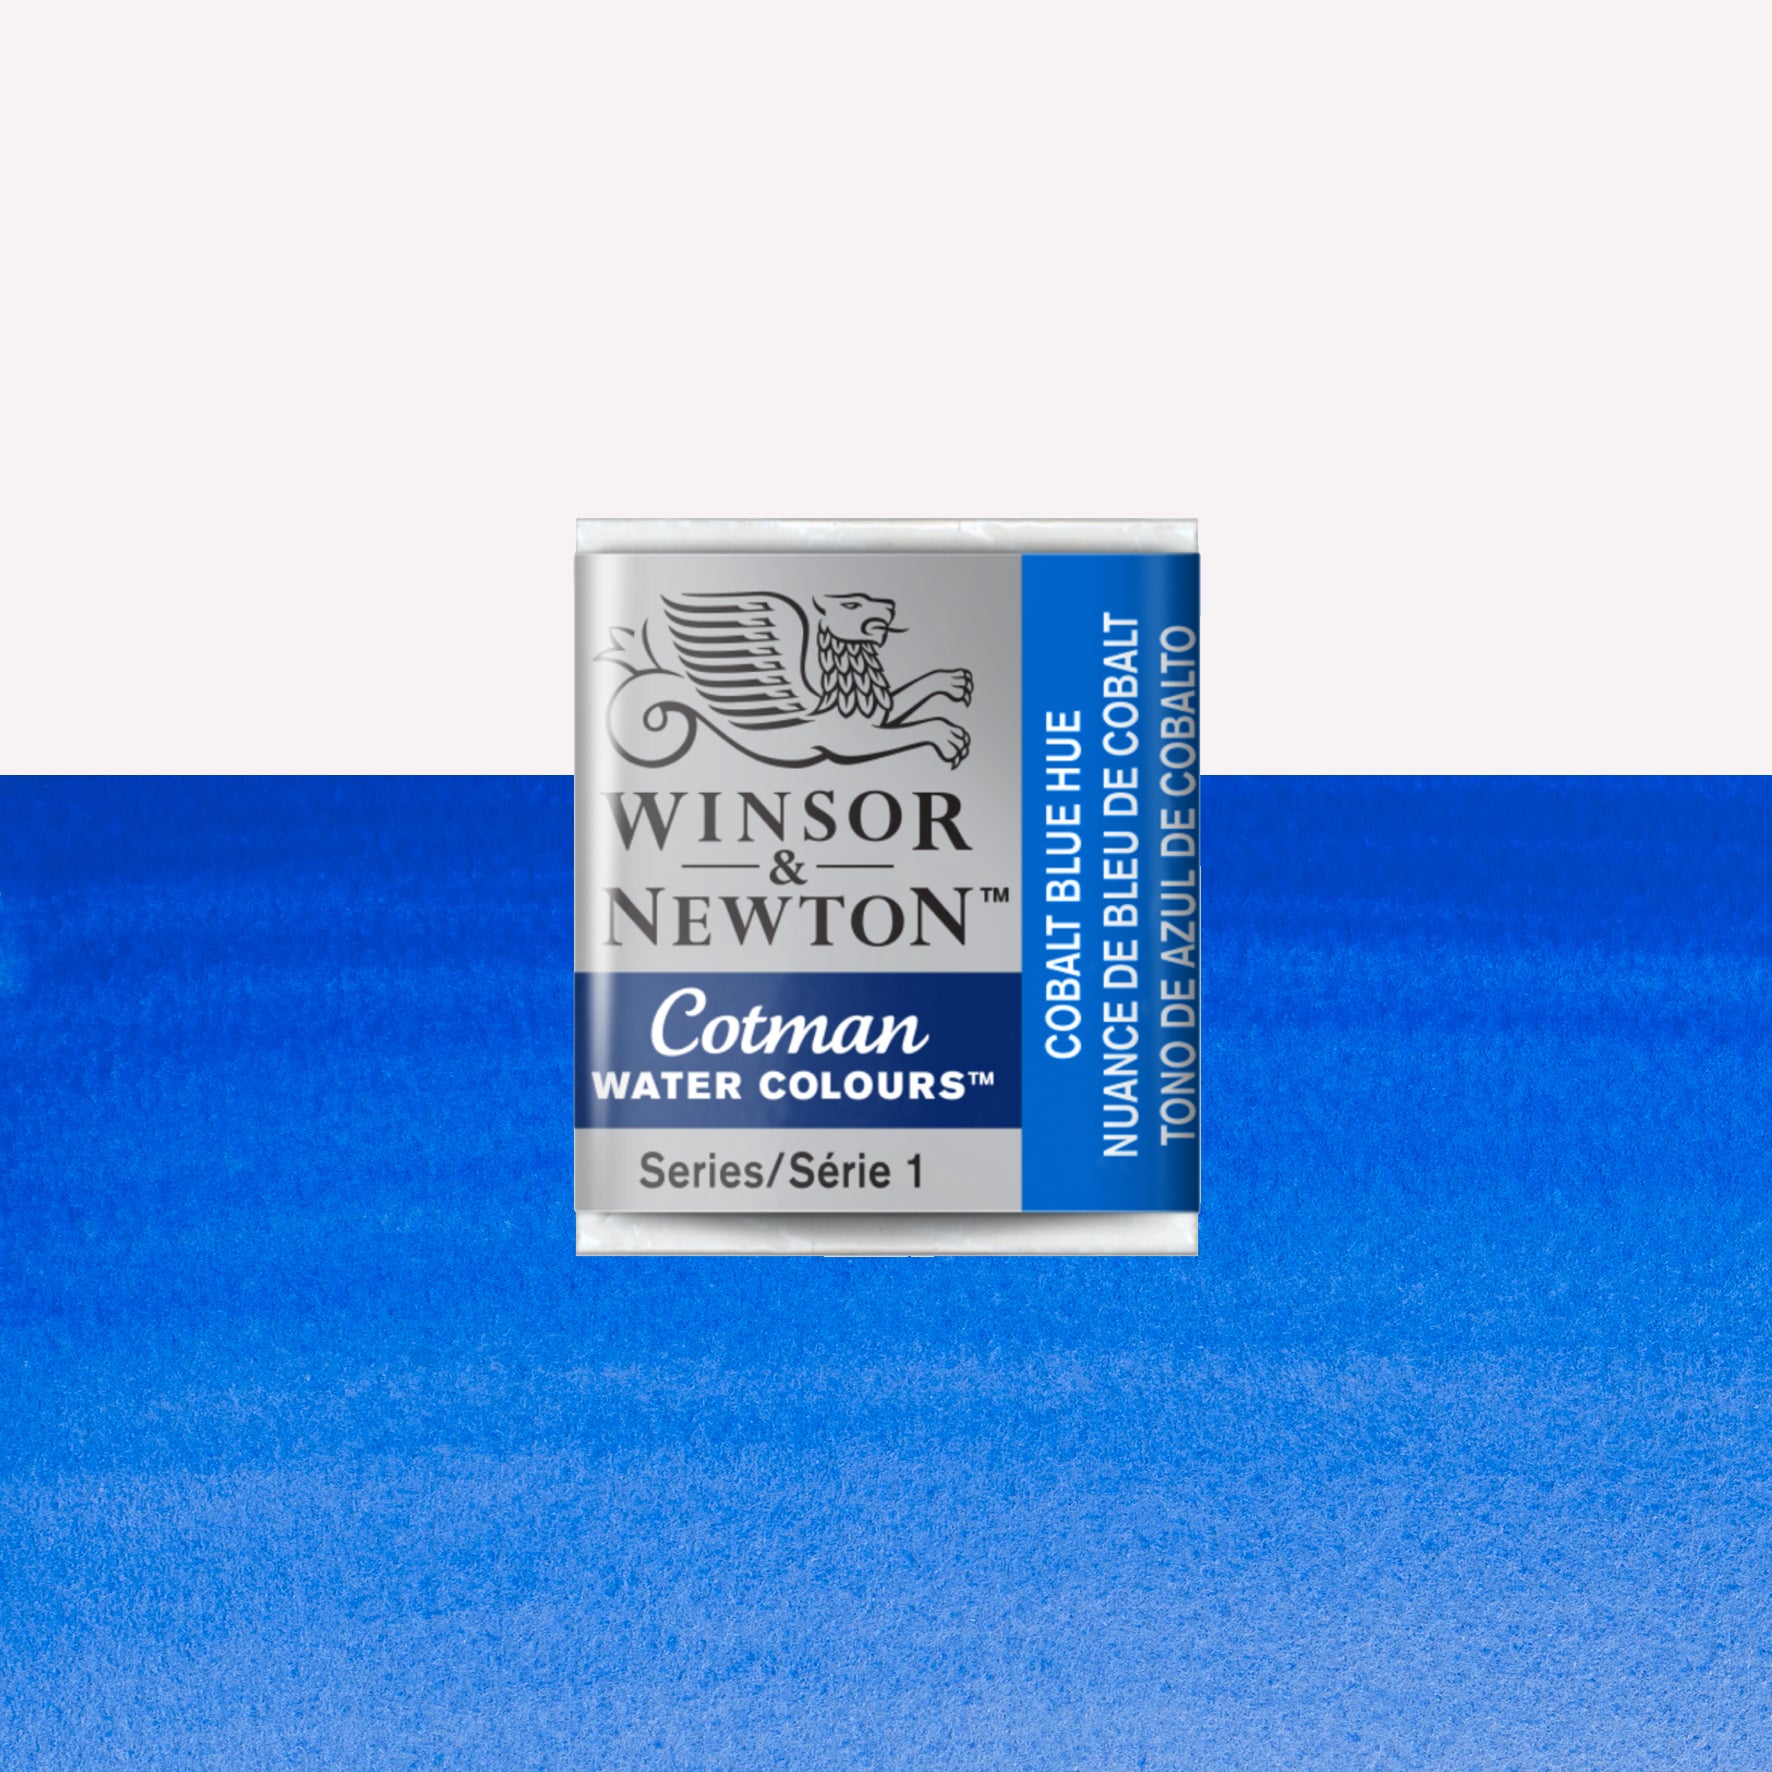 Winsor & Newton Cotman watercolour half pan in the shade Cobalt Blue Hue over a vibrant colour swatch. These half pans have a solid formula and are packaged in compressed paint cake. 